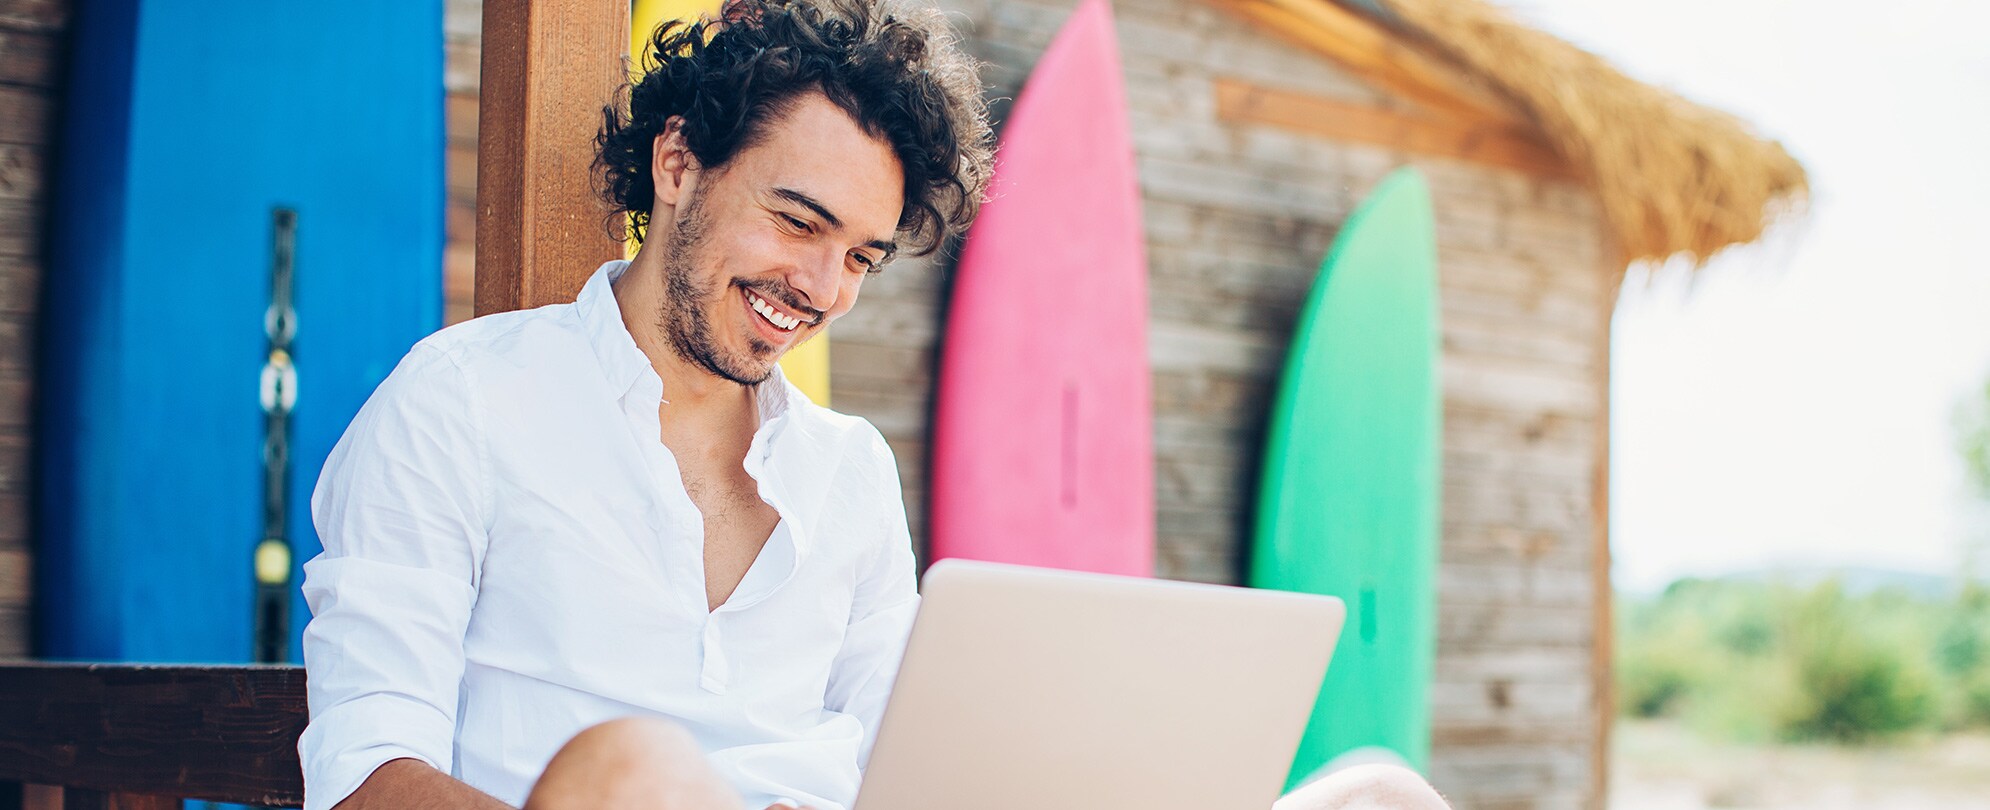 Man sitting near a surfboard shed and smiling while looking down at a laptop.